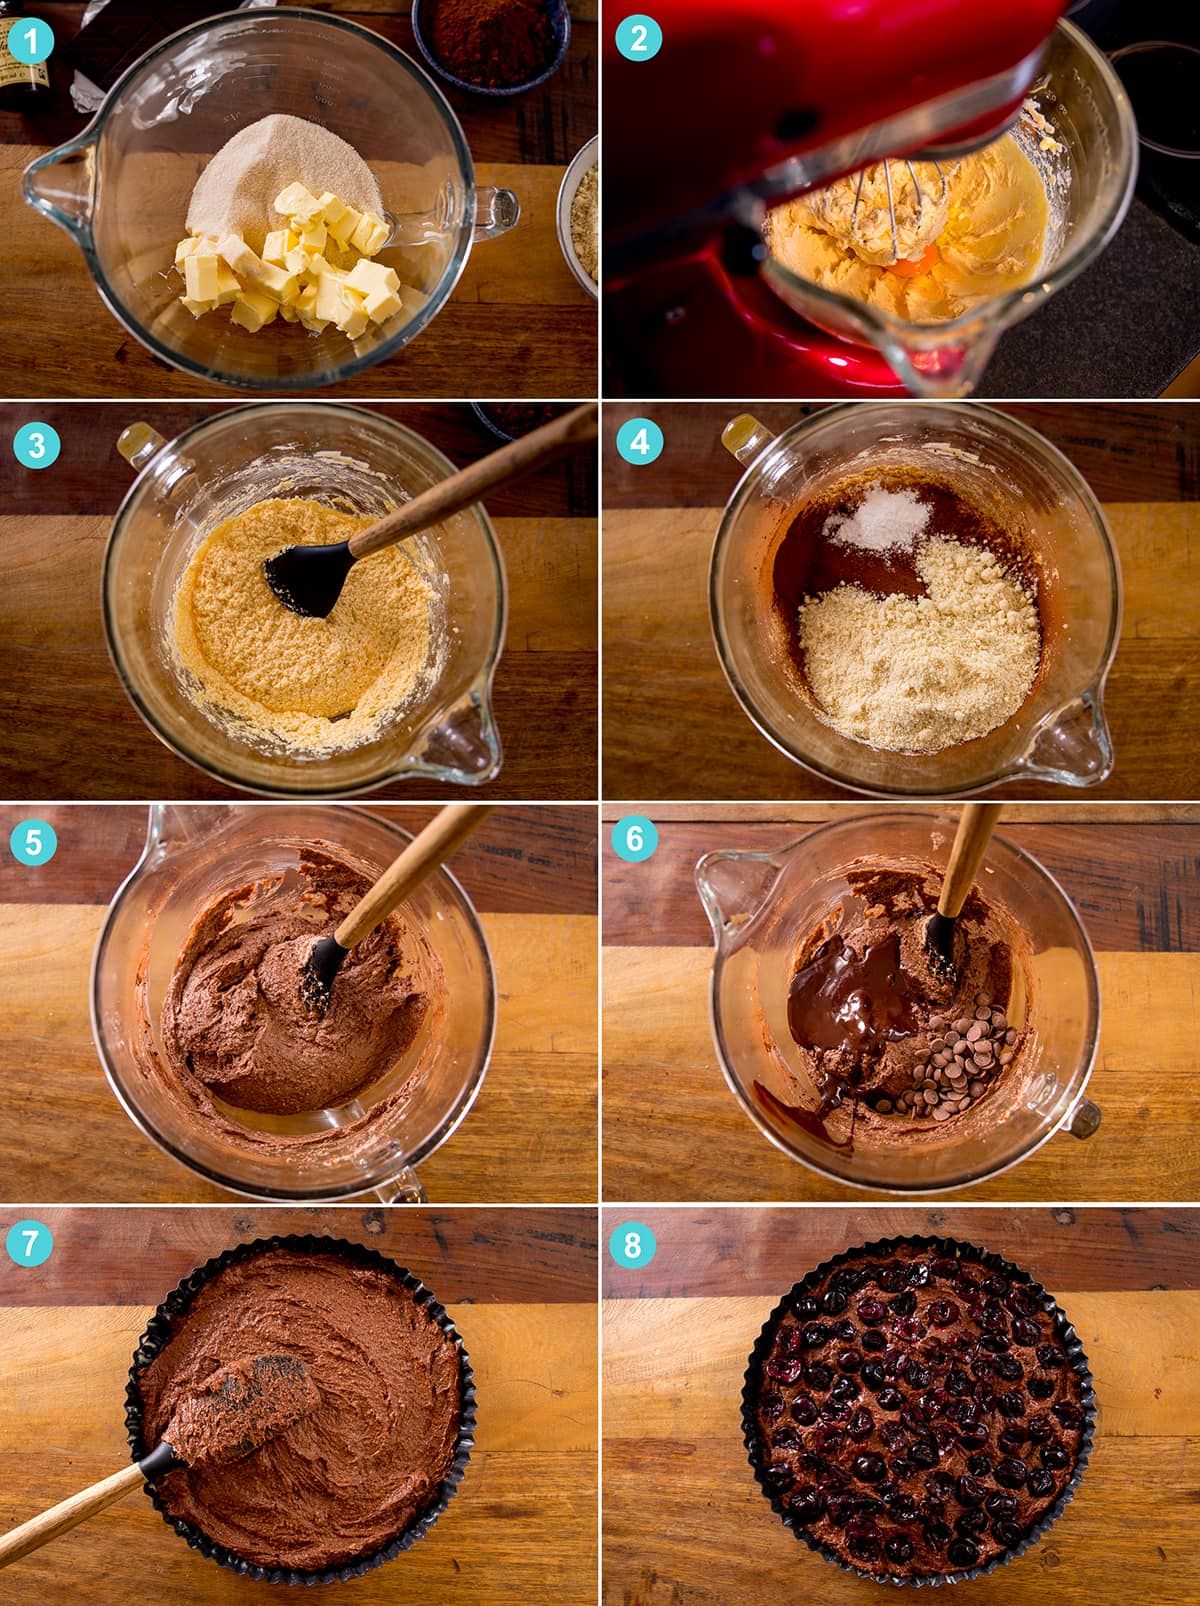 8 image collage showing how to make Chocolate Cherry Cake